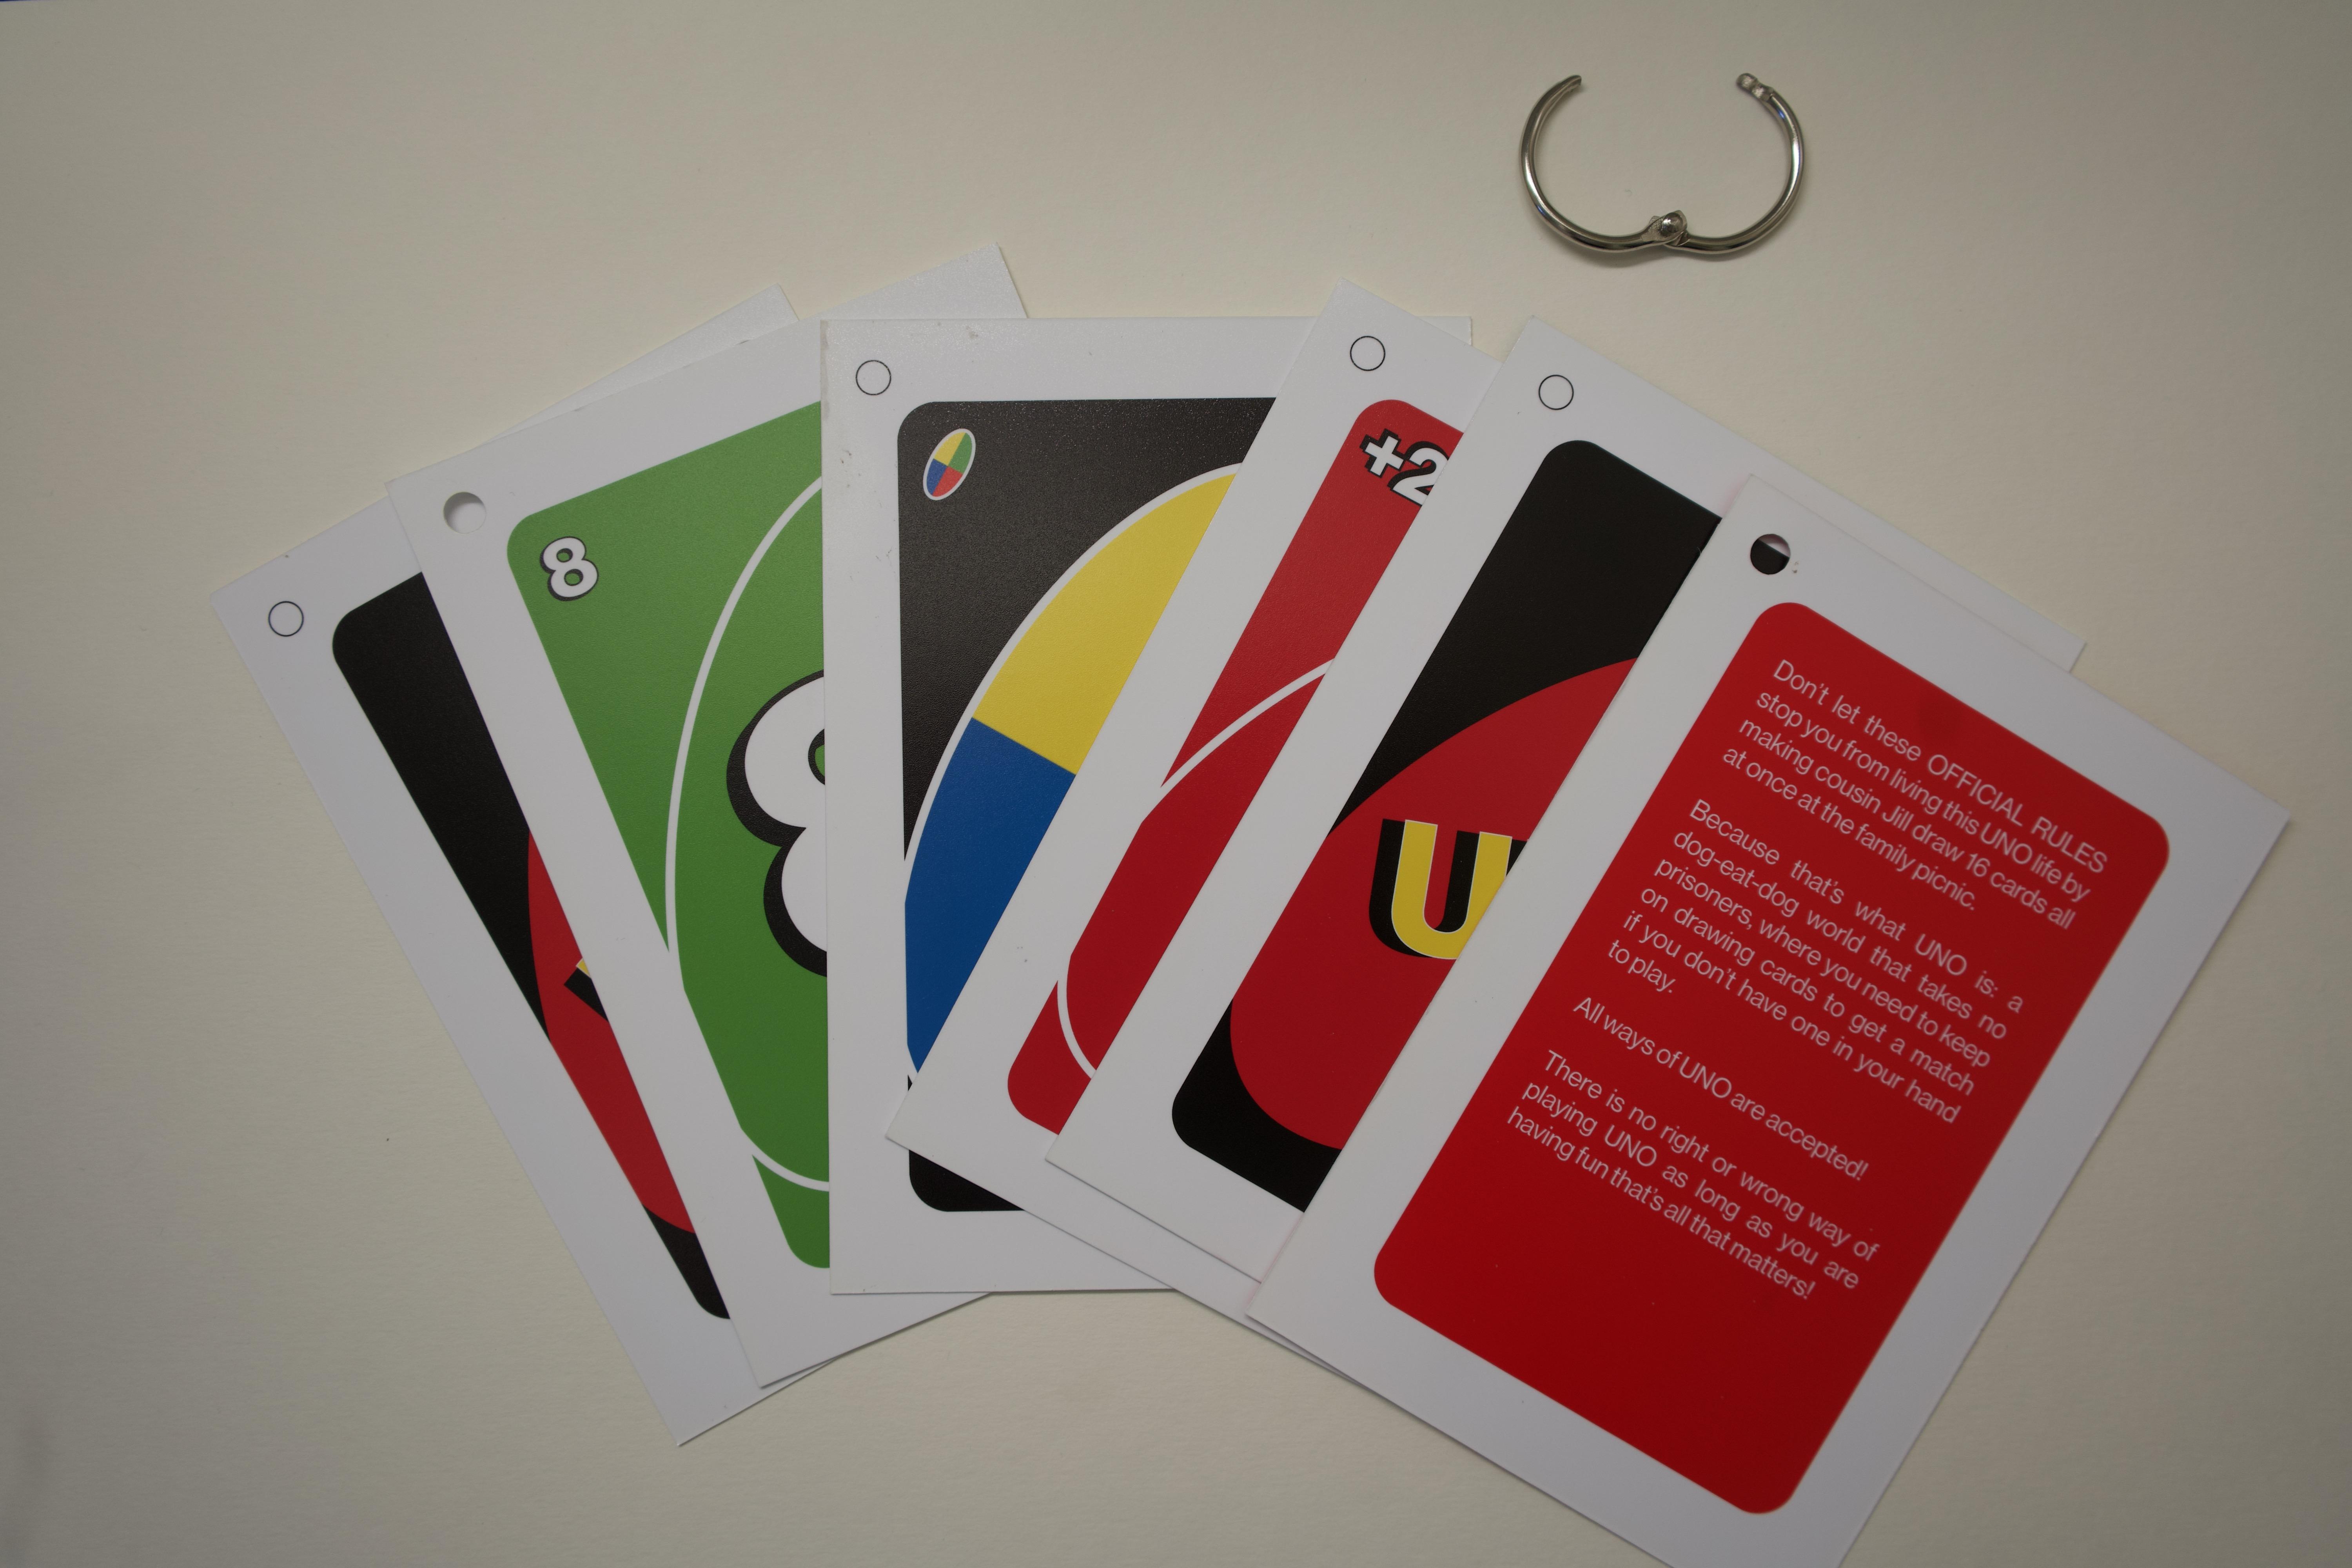 Uno – The official rules